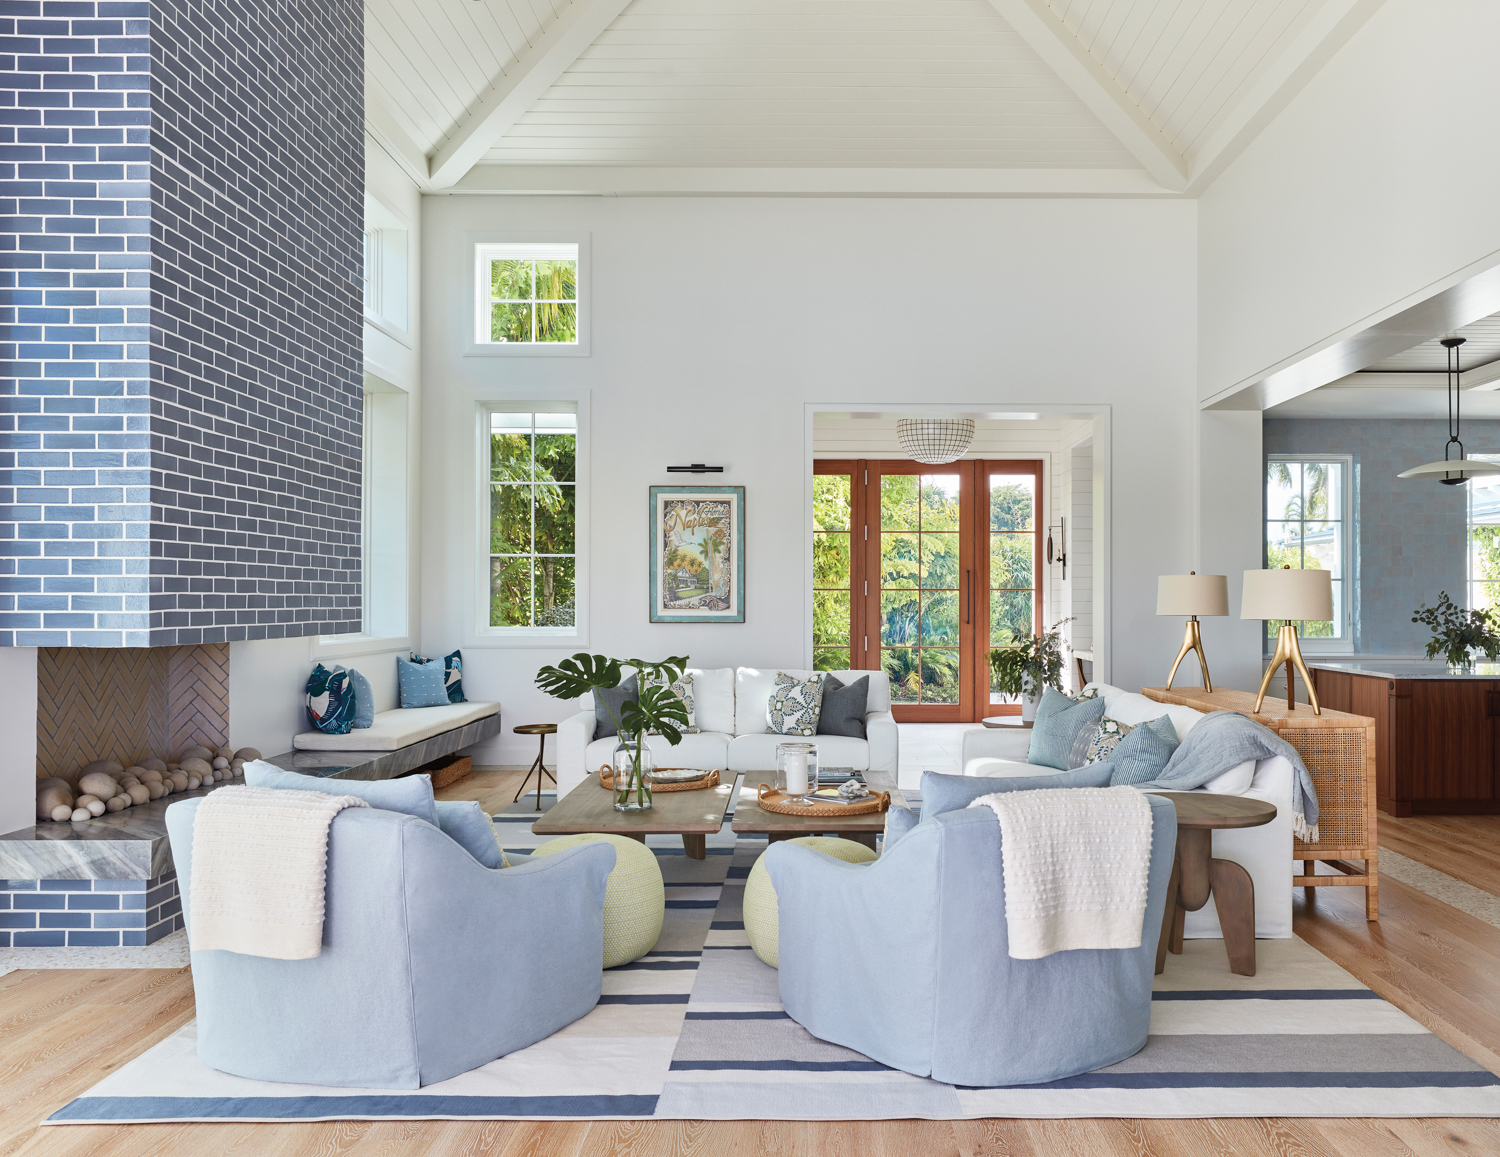 living area with light blue armchairs, blue fireplace, white walls and striped rug